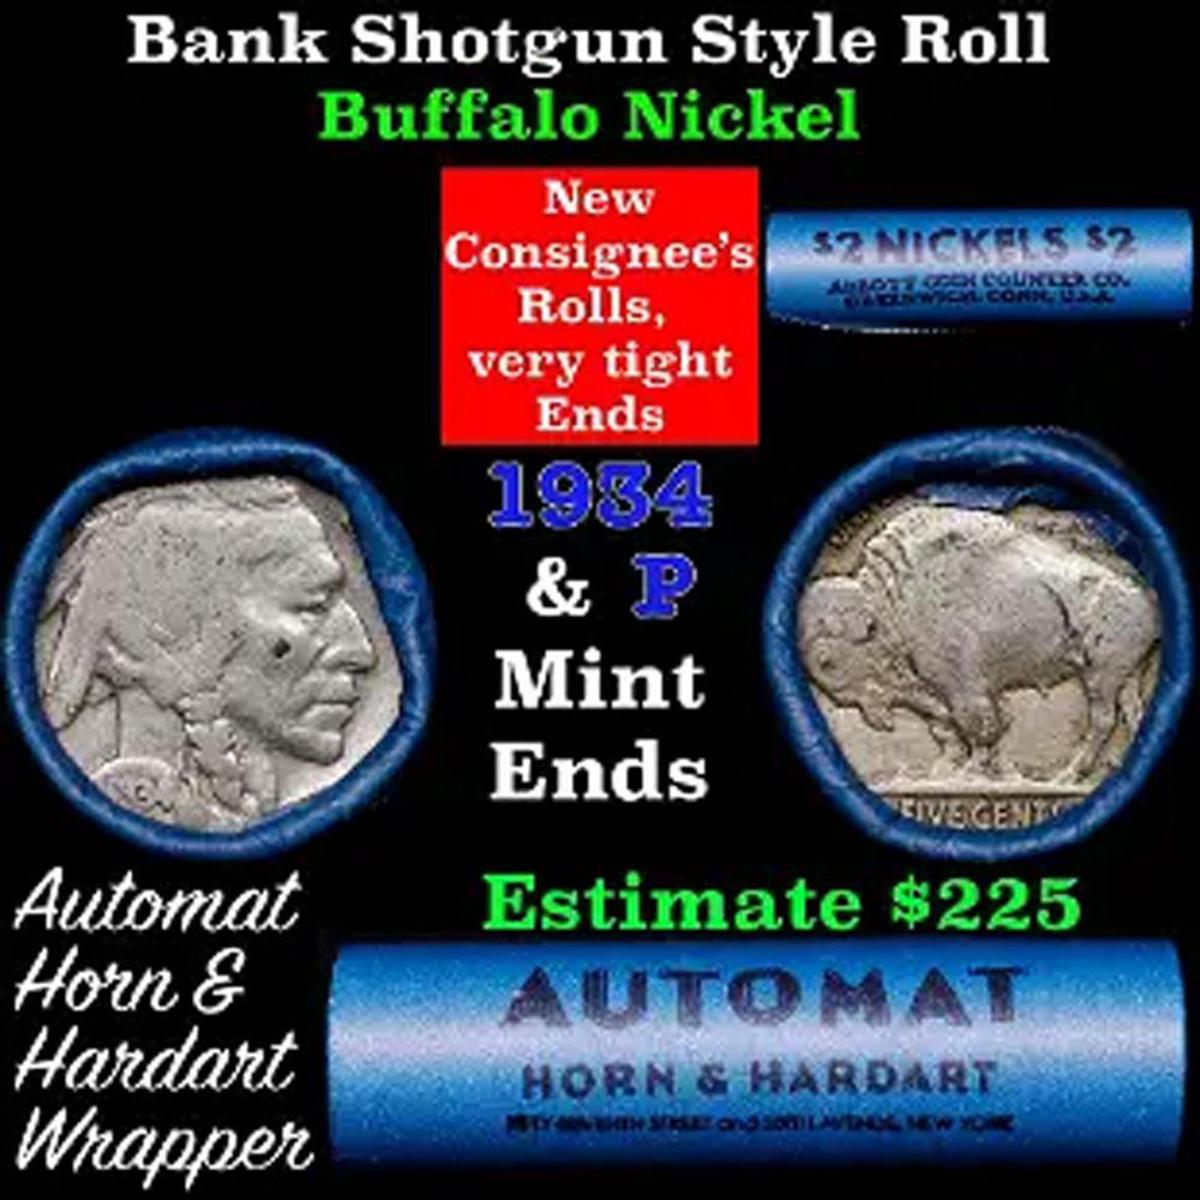 Buffalo Nickel Shotgun Roll in Old Bank Style 'Automat' Wrapper 1935 & p Mint Ends